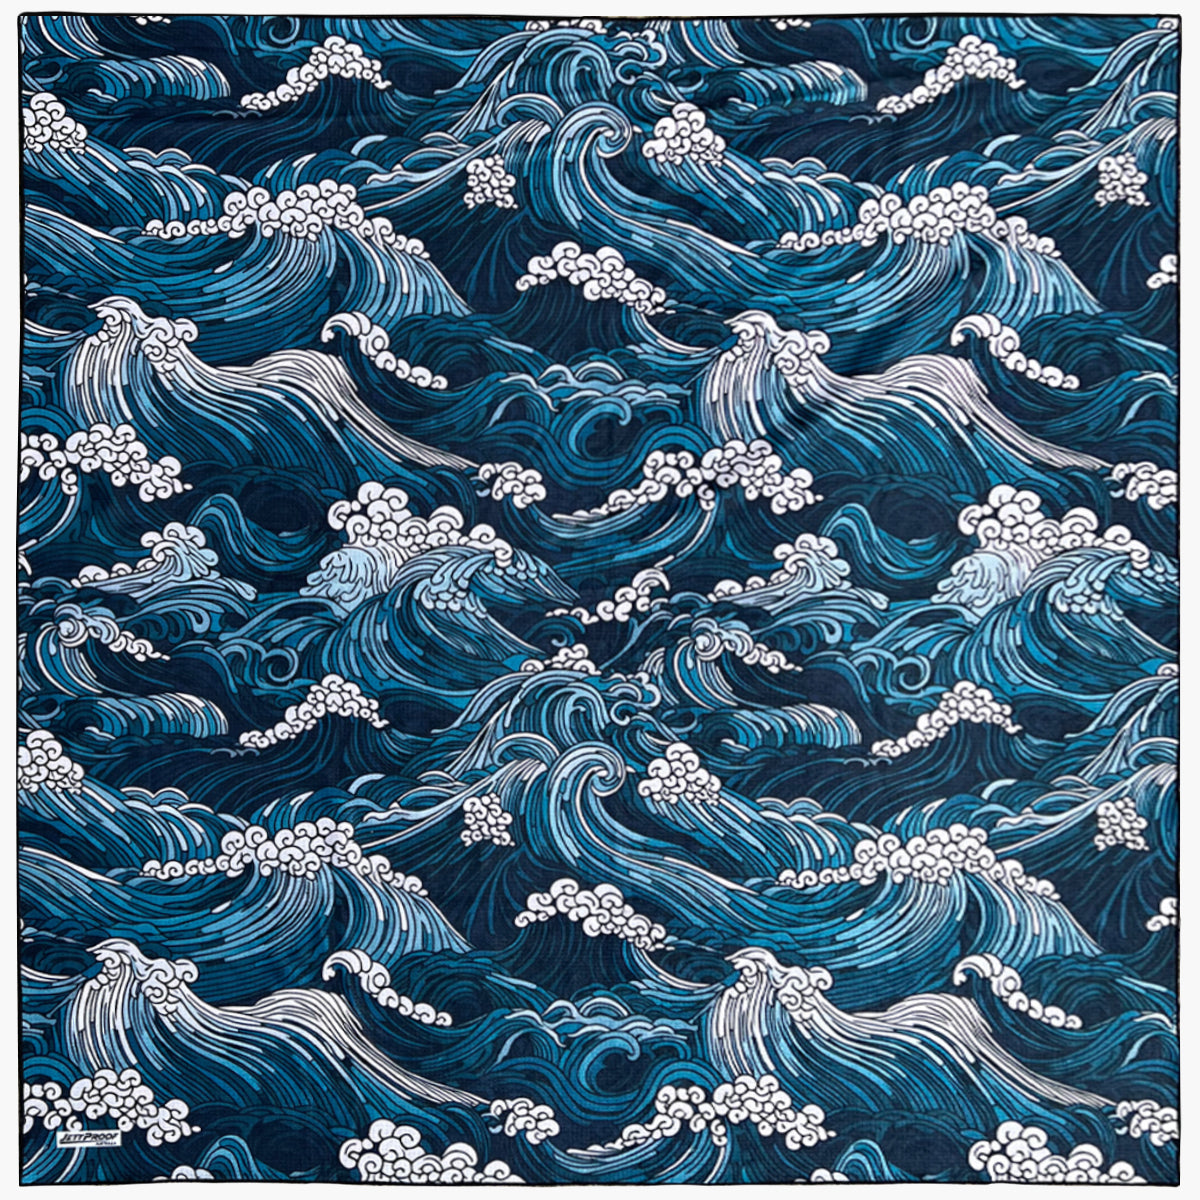 The Great Wave - Beach Blanket